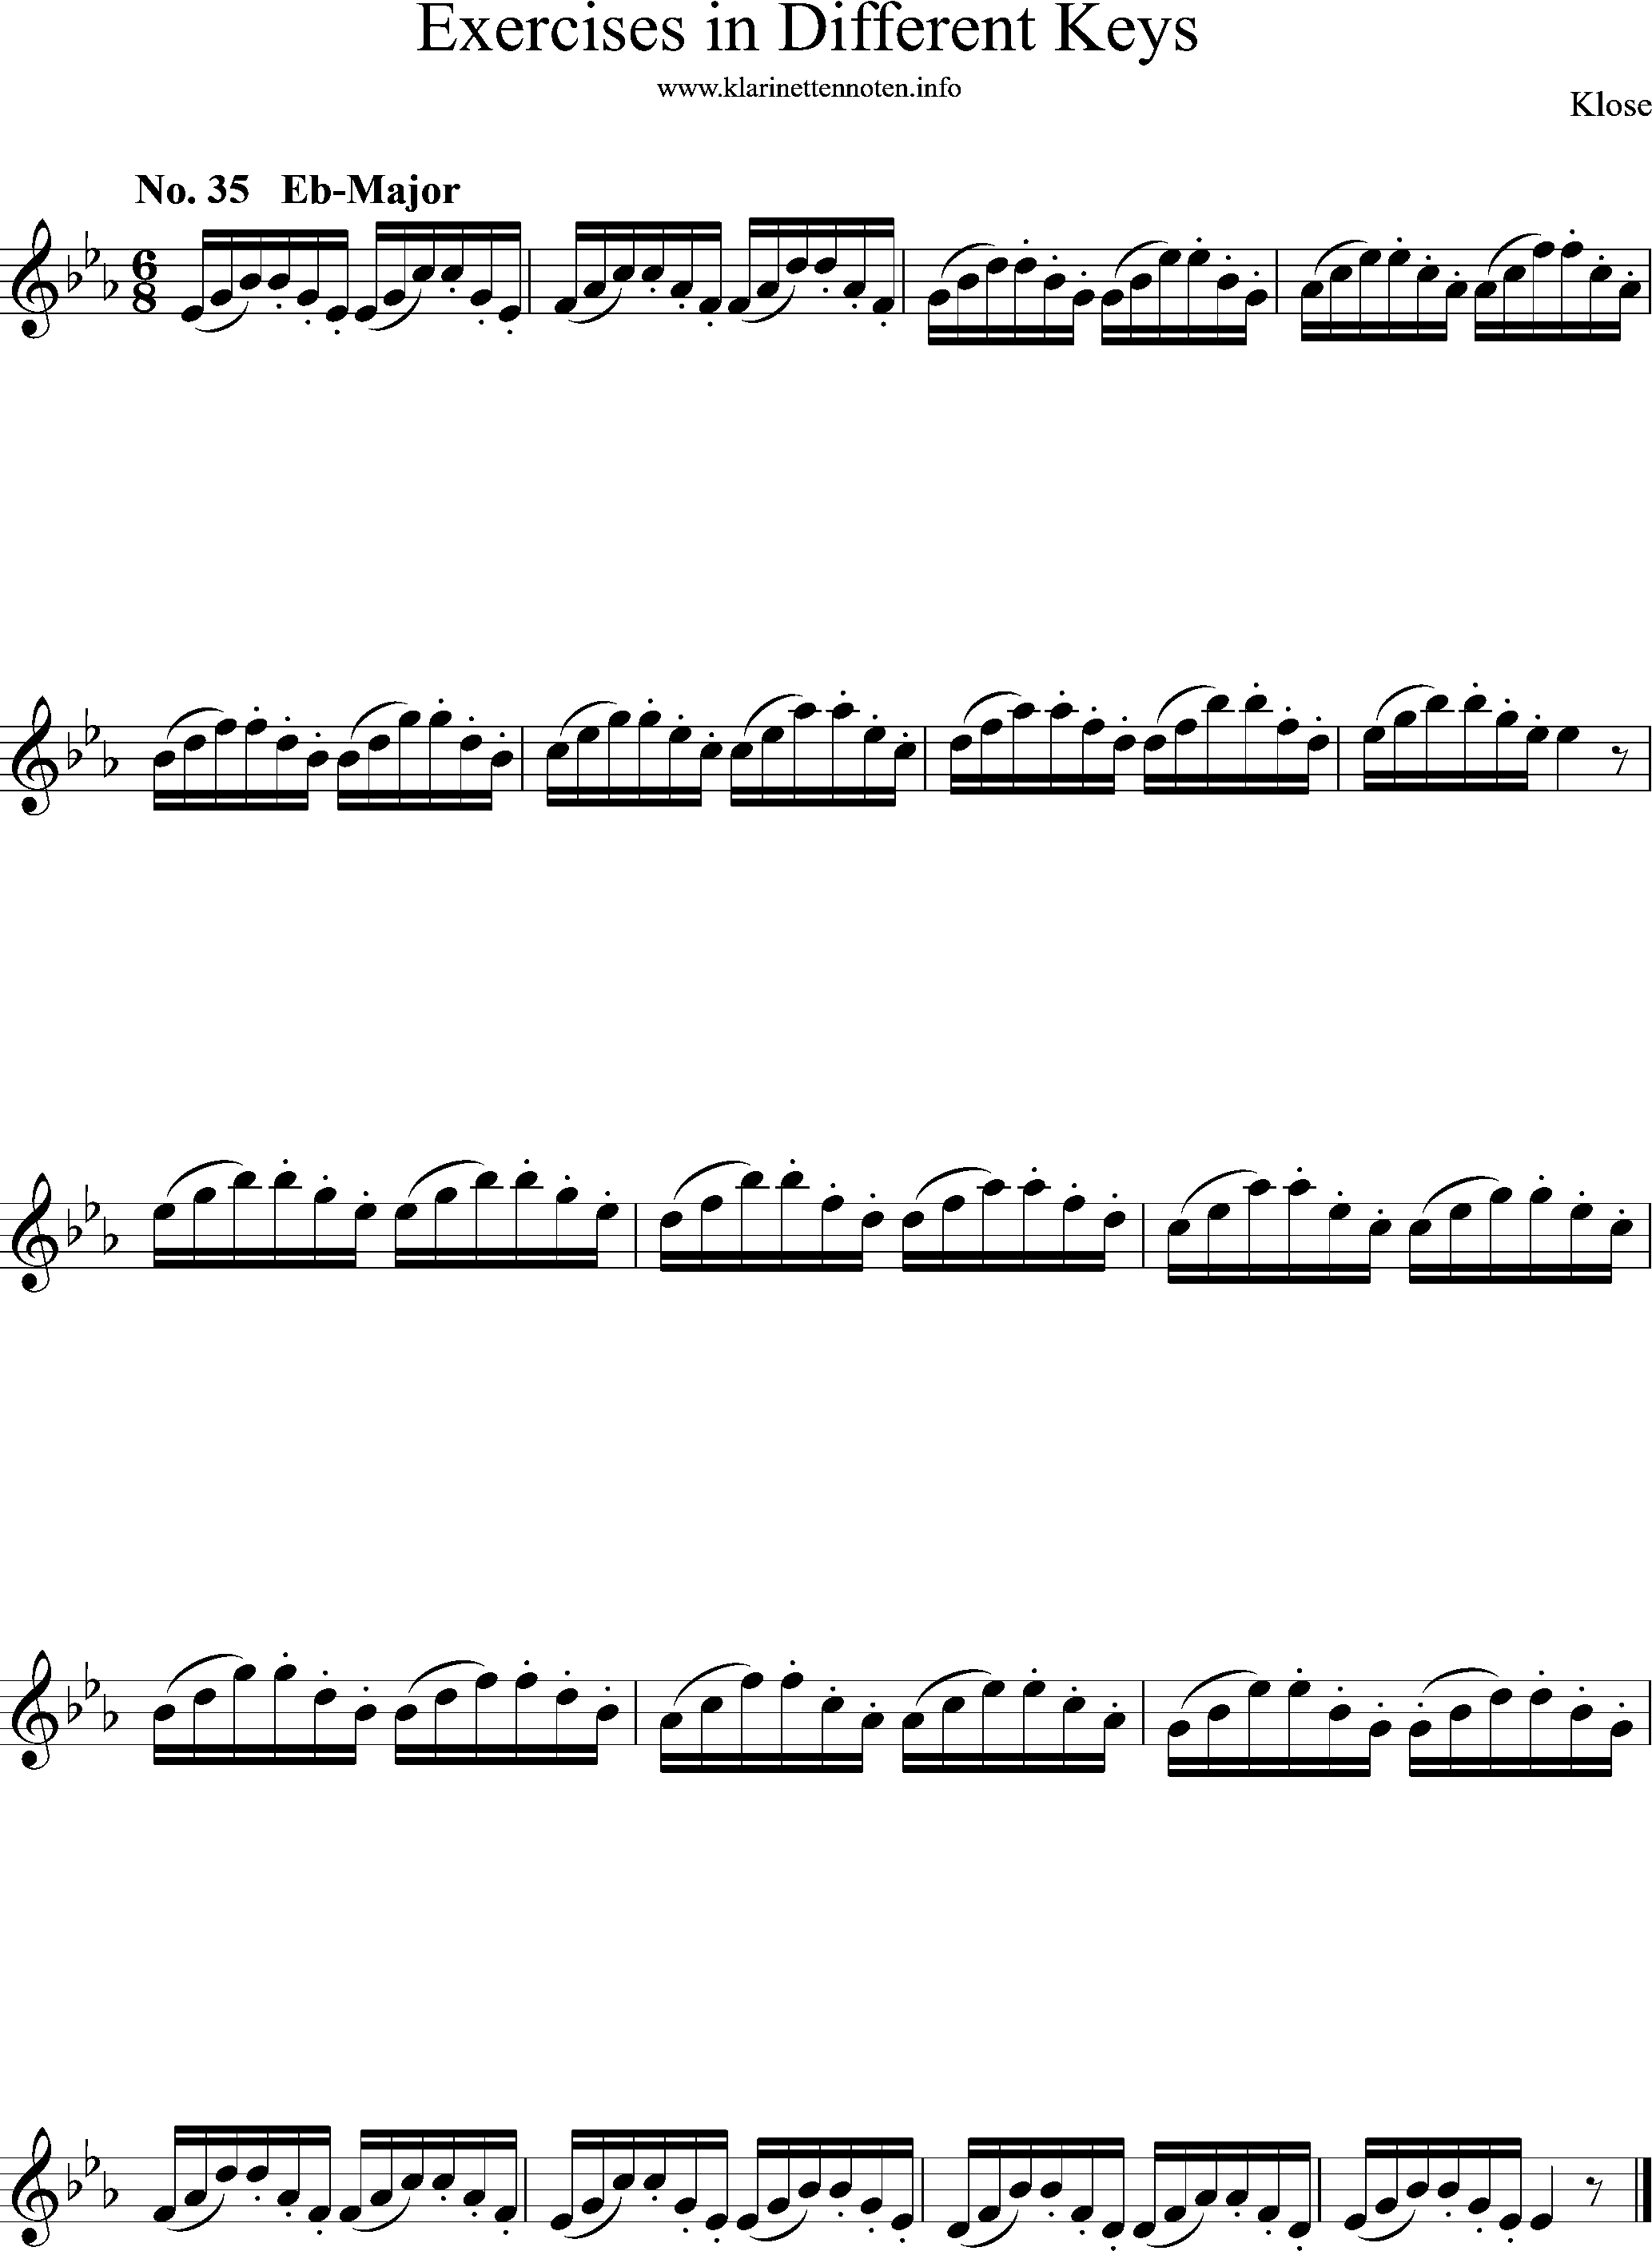 Exercises in Differewnt Keys, klose, No-35, Eb-Major